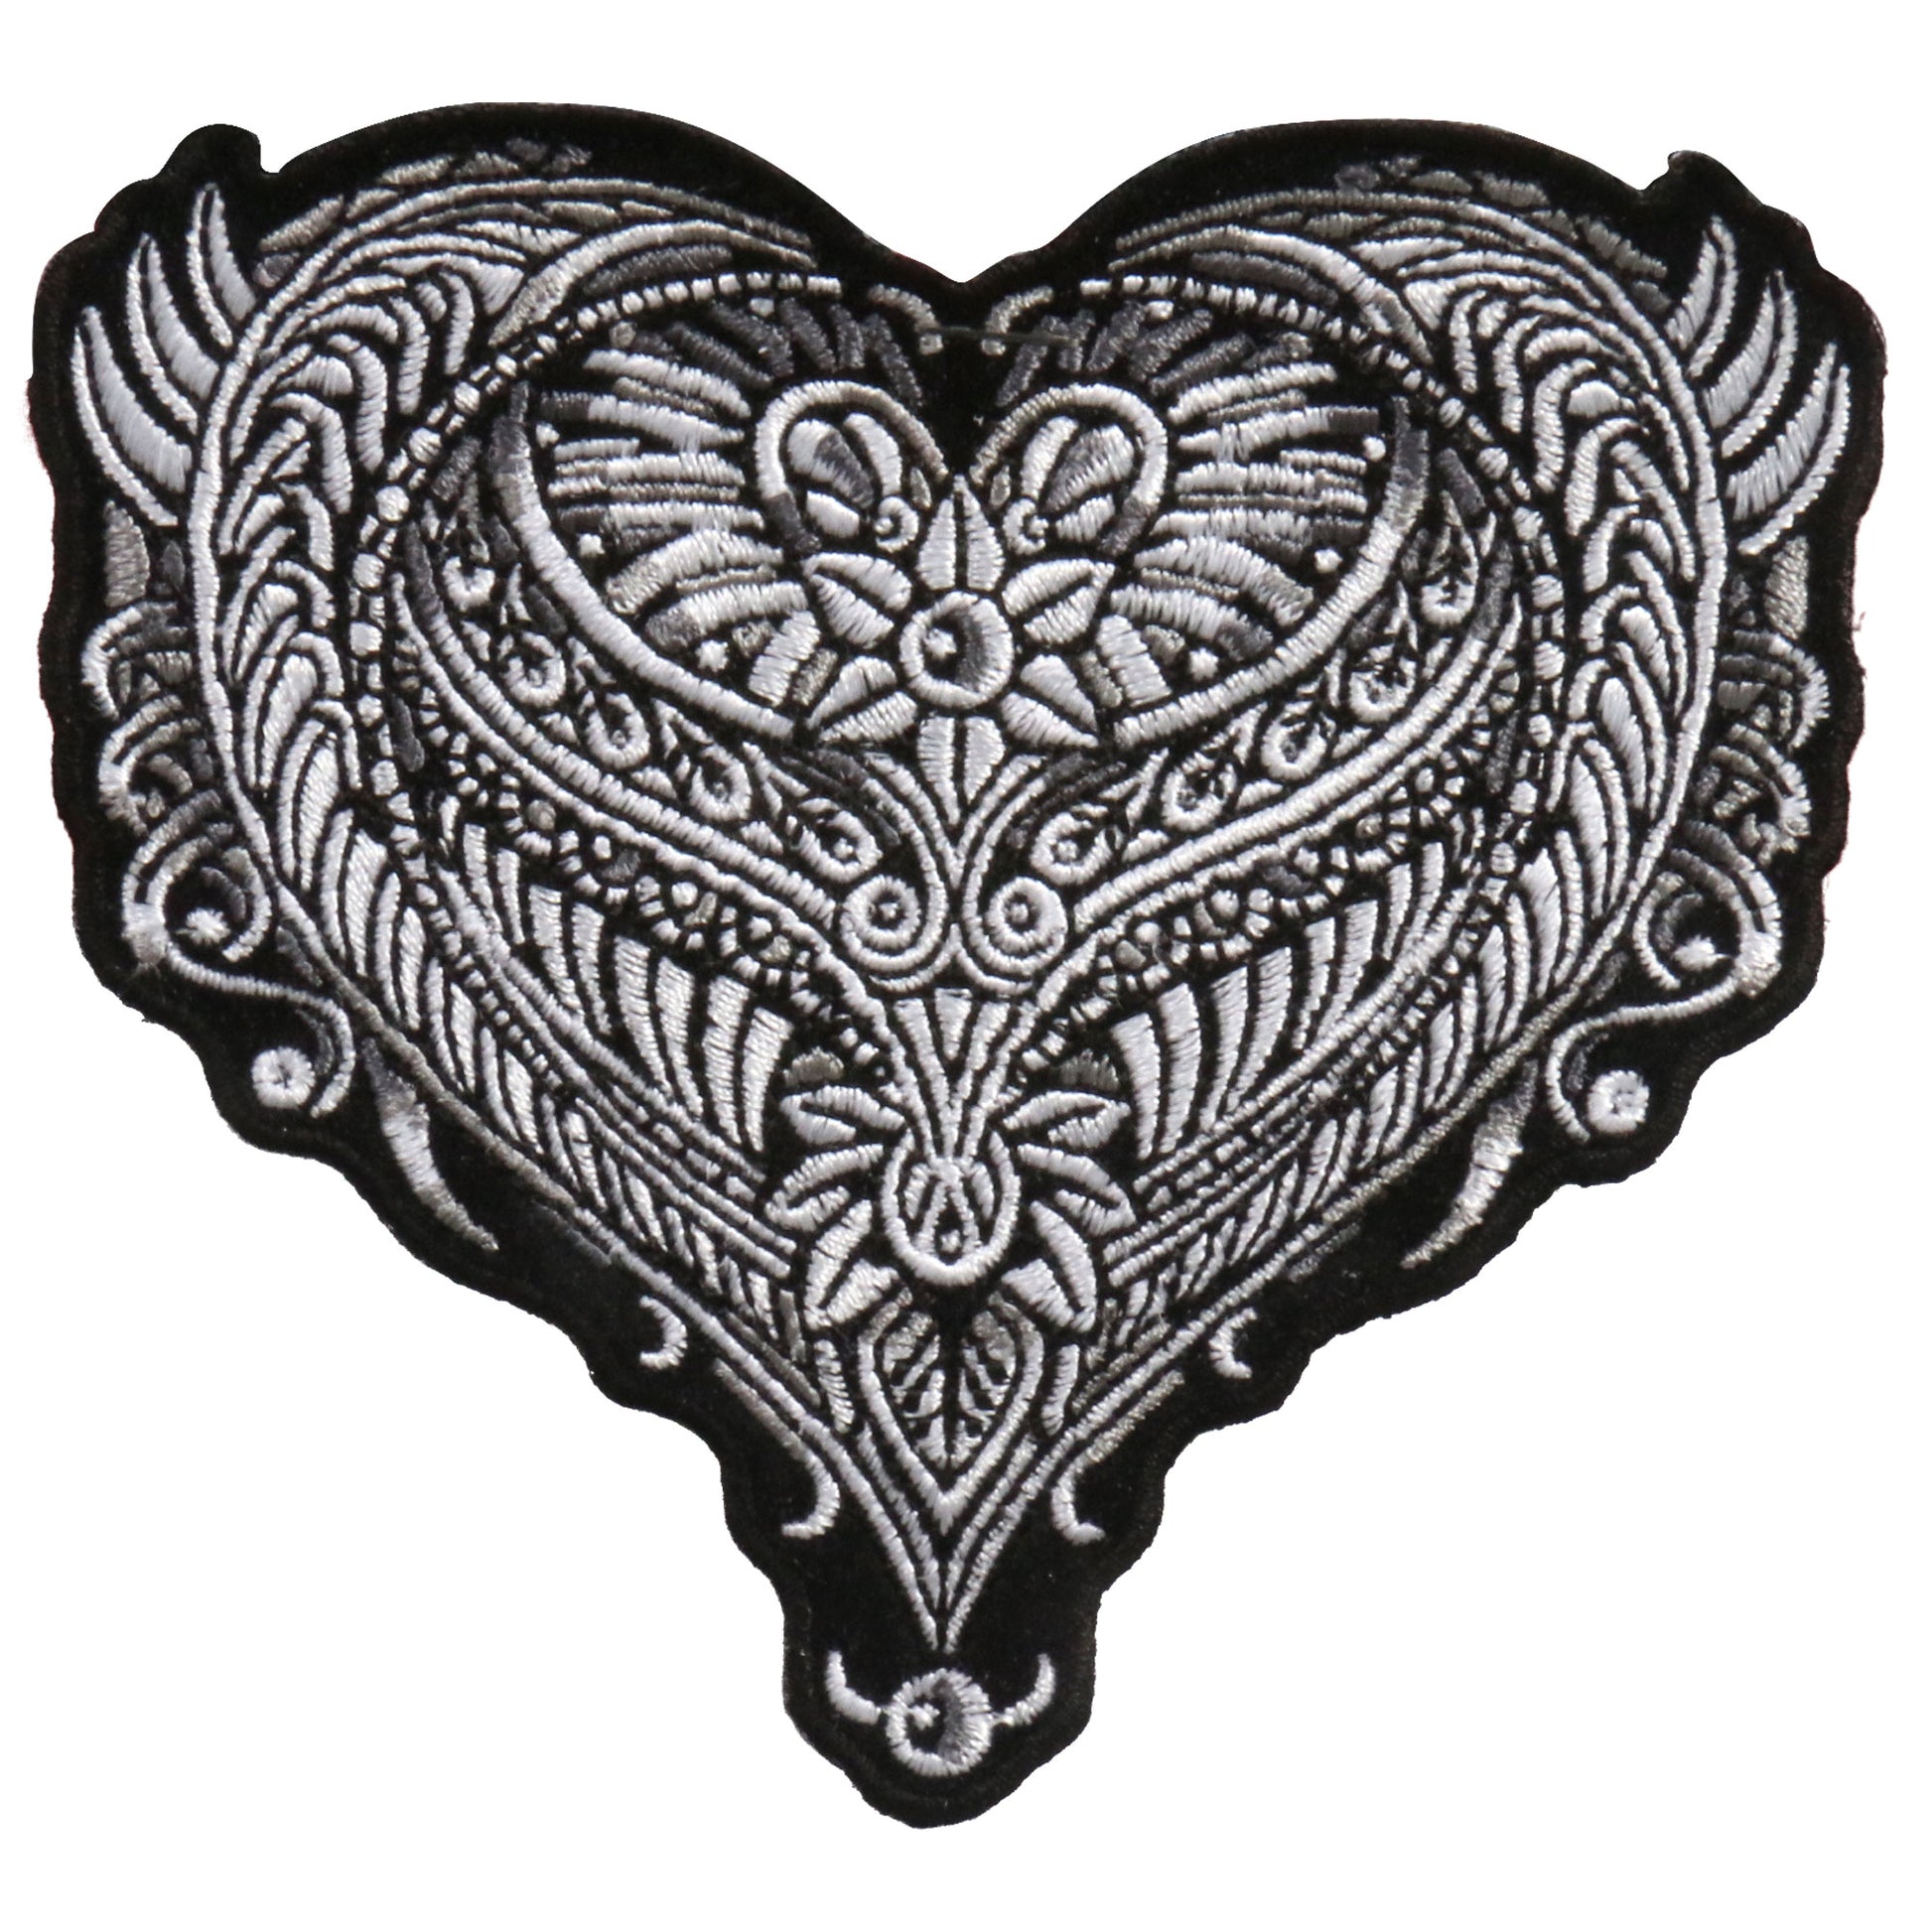 Hot Leathers PPA9200 Ornate Heart 4" x 4" Patch